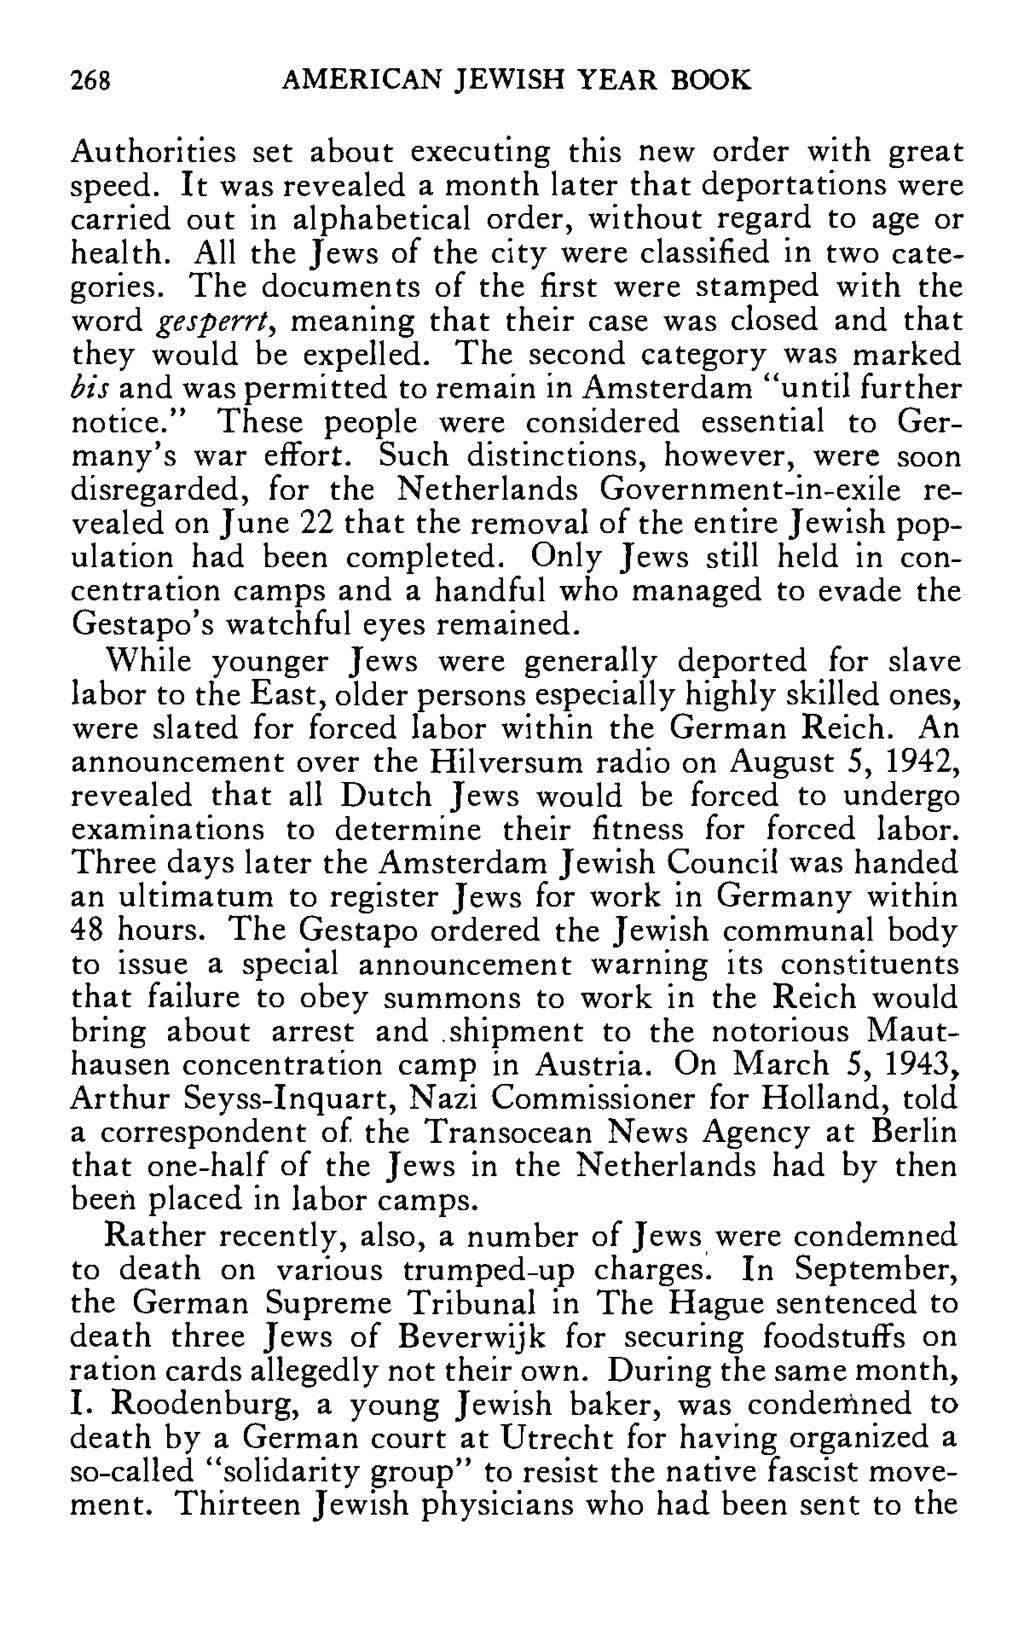 268 AMERICAN JEWISH YEAR BOOK Authorities set about executing this new order with great speed.